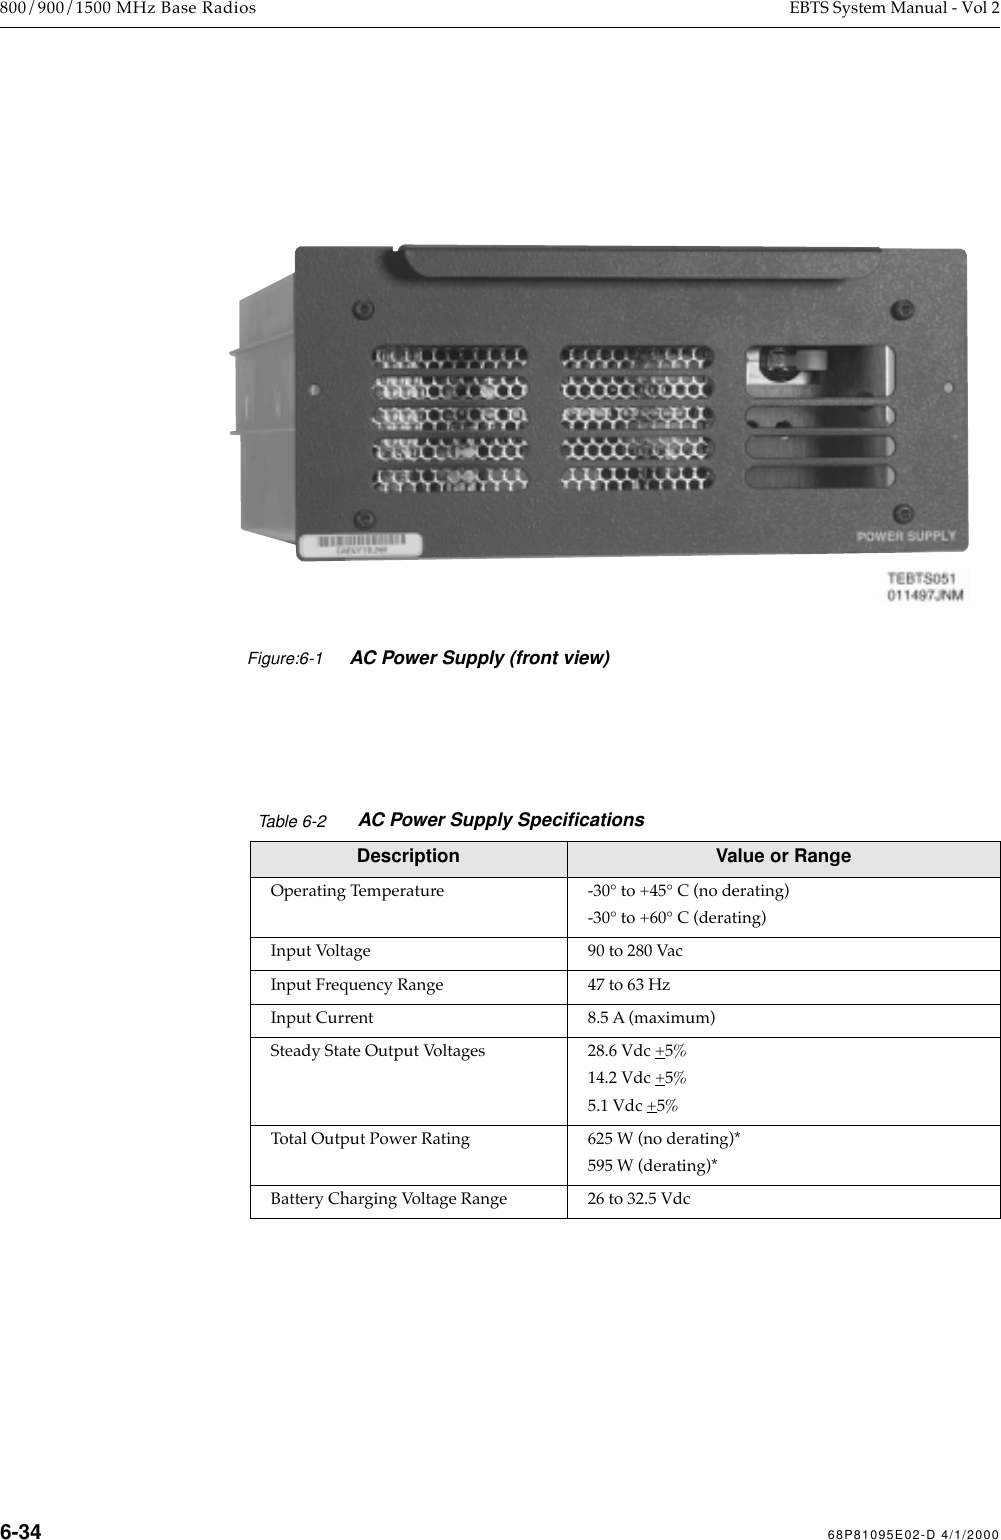  6-34 68P81095E02-D 4/1/2000 800/900/1500 MHz Base Radios EBTS System Manual - Vol 2   Table 6-2 AC Power Supply Speciﬁcations Description Value or Range Operating Temperature -30¡ to +45¡ C (no derating)-30¡ to +60¡ C (derating)Input Voltage 90 to 280 VacInput Frequency Range 47 to 63 HzInput Current 8.5 A (maximum)Steady State Output Voltages 28.6 Vdc +5%14.2 Vdc +5%5.1 Vdc +5%Total Output Power Rating 625 W (no derating)*595 W (derating)*Battery Charging Voltage Range 26 to 32.5 VdcFigure:6-1AC Power Supply (front view)